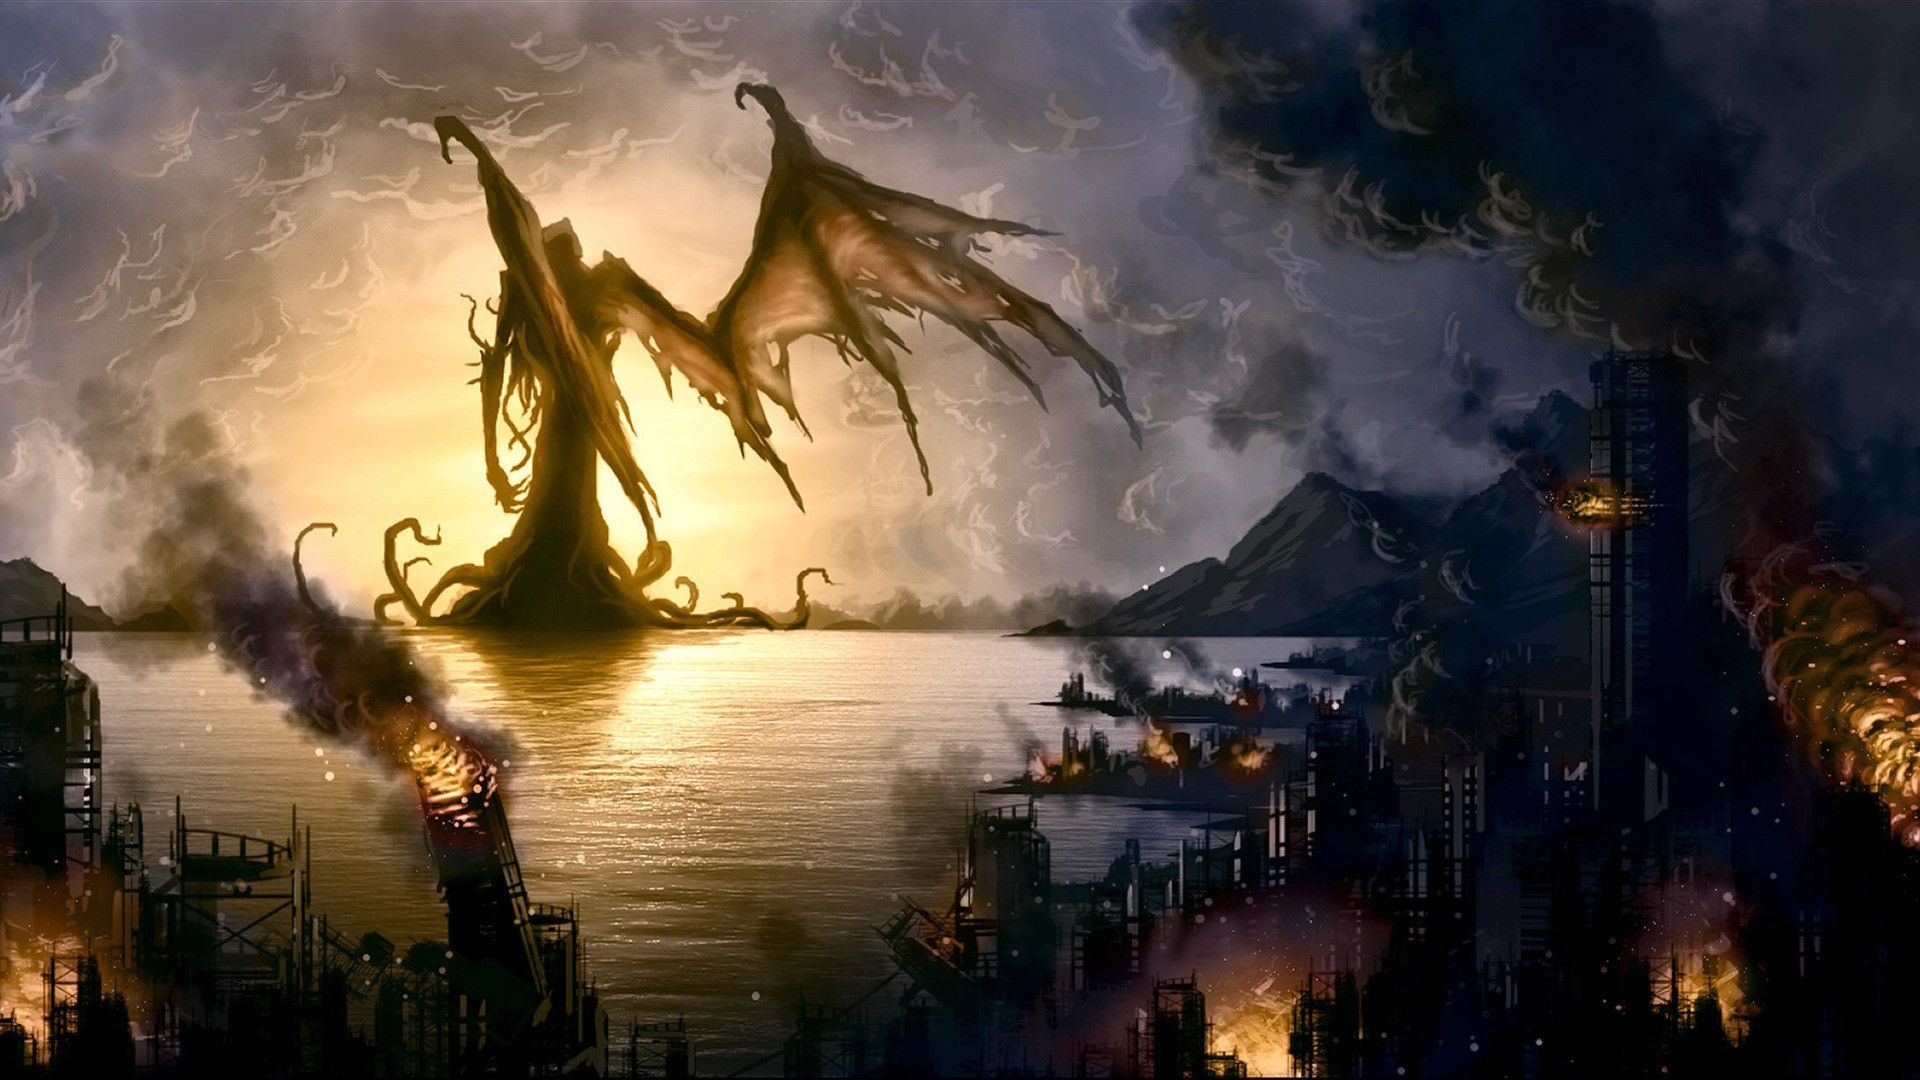 130 Cthulhu HD Wallpapers Backgrounds - Wallpaper Abyss